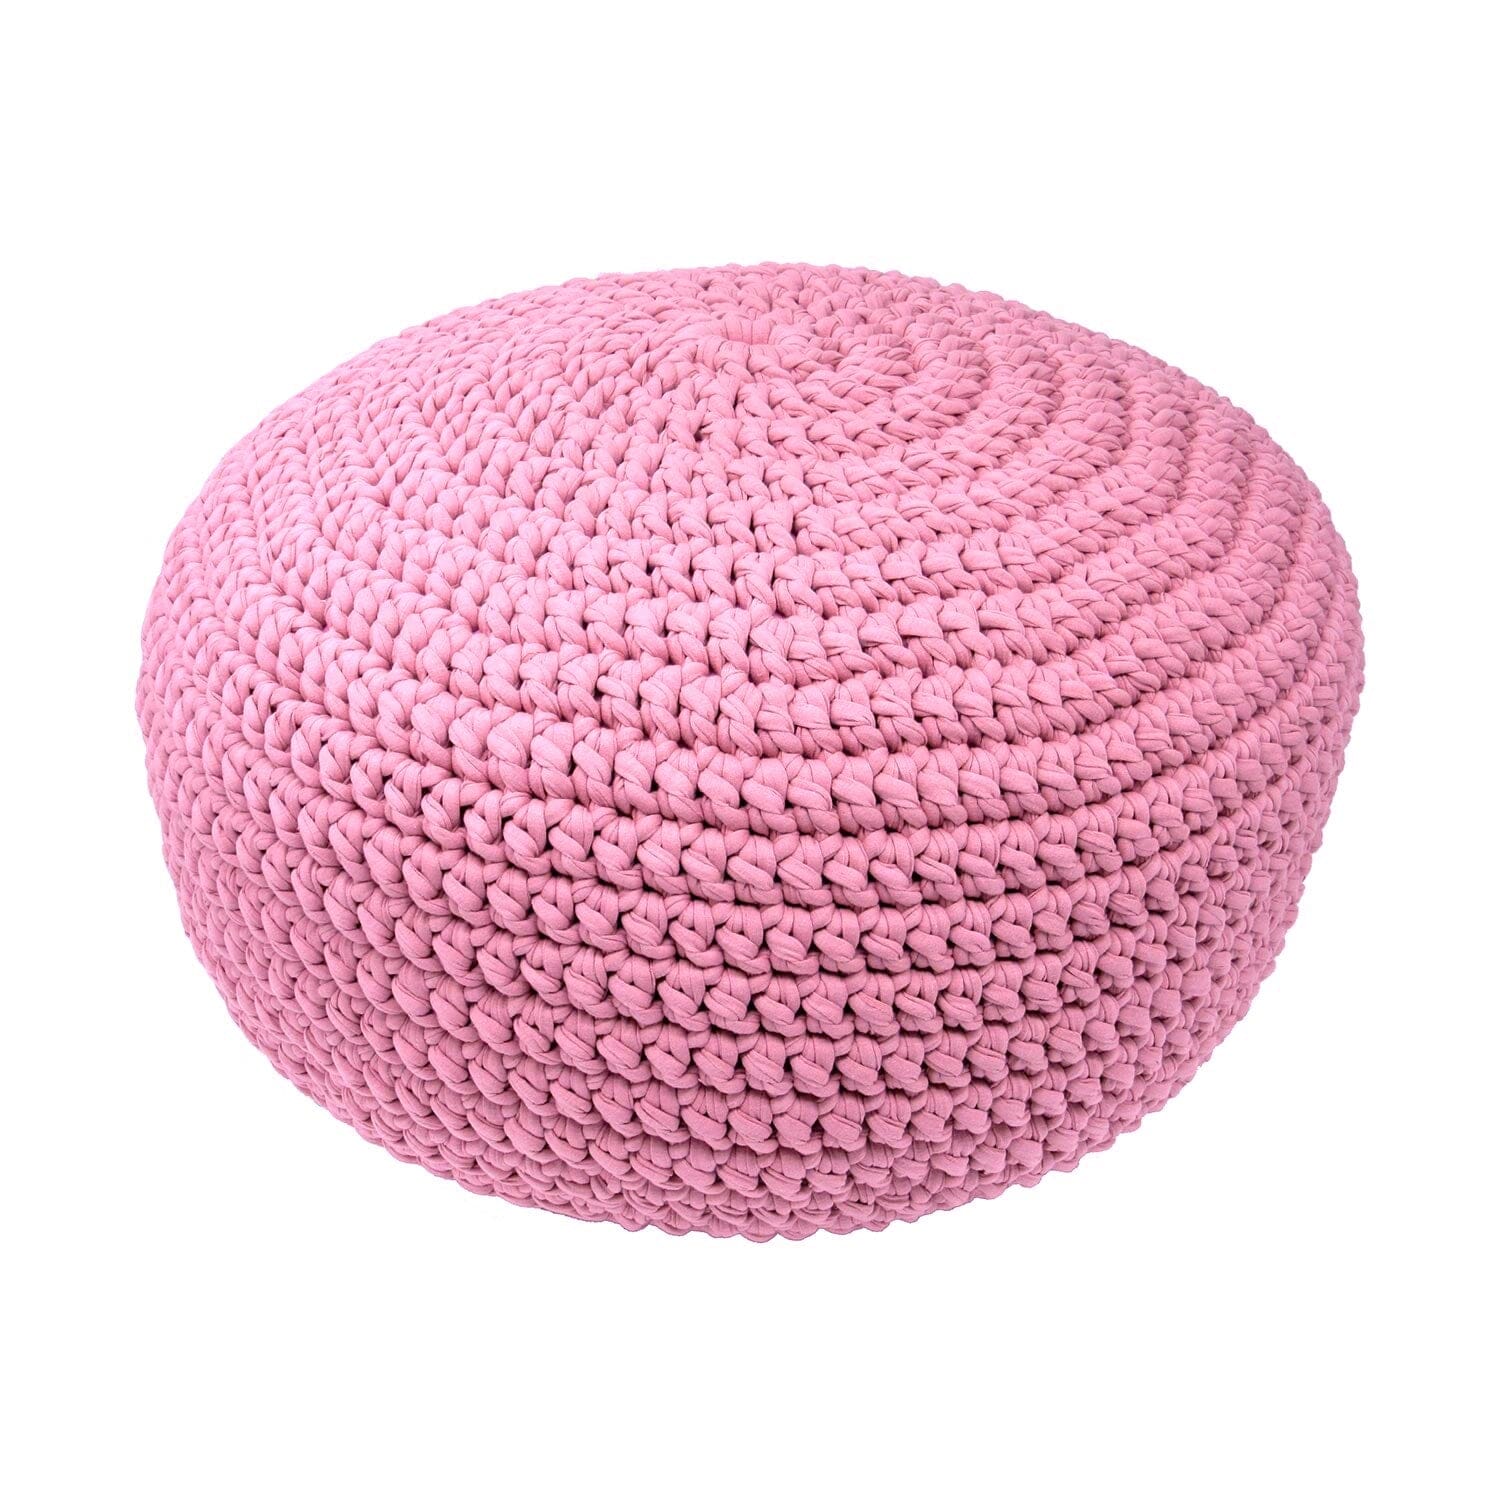 Made by Artisans Candy Pink Cotton Crochet Floor Pebble Ottomans & Floor Pebbles Made by Artisans 